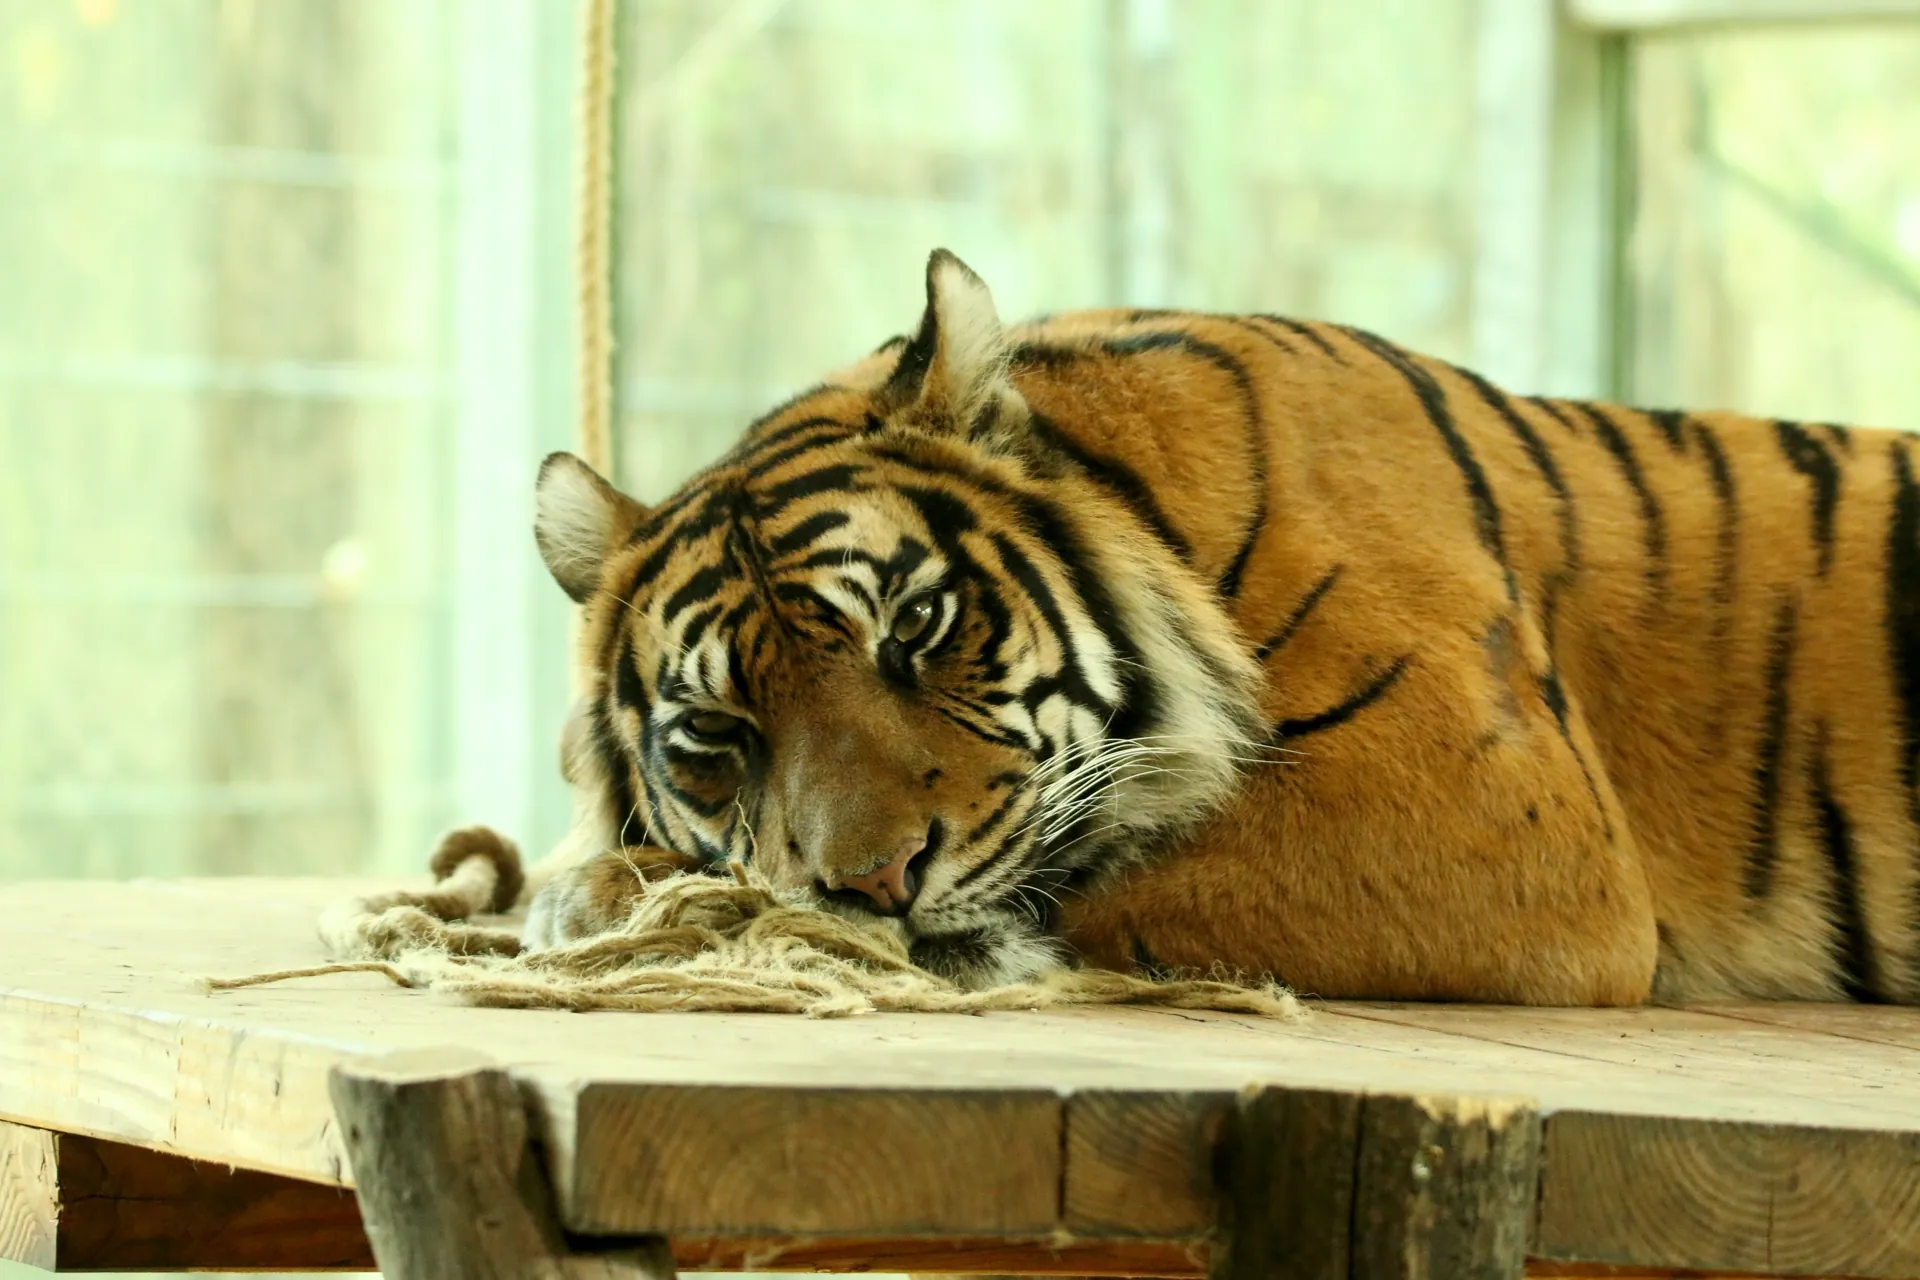 A tiger lying on a wooden platform looking into the camera.